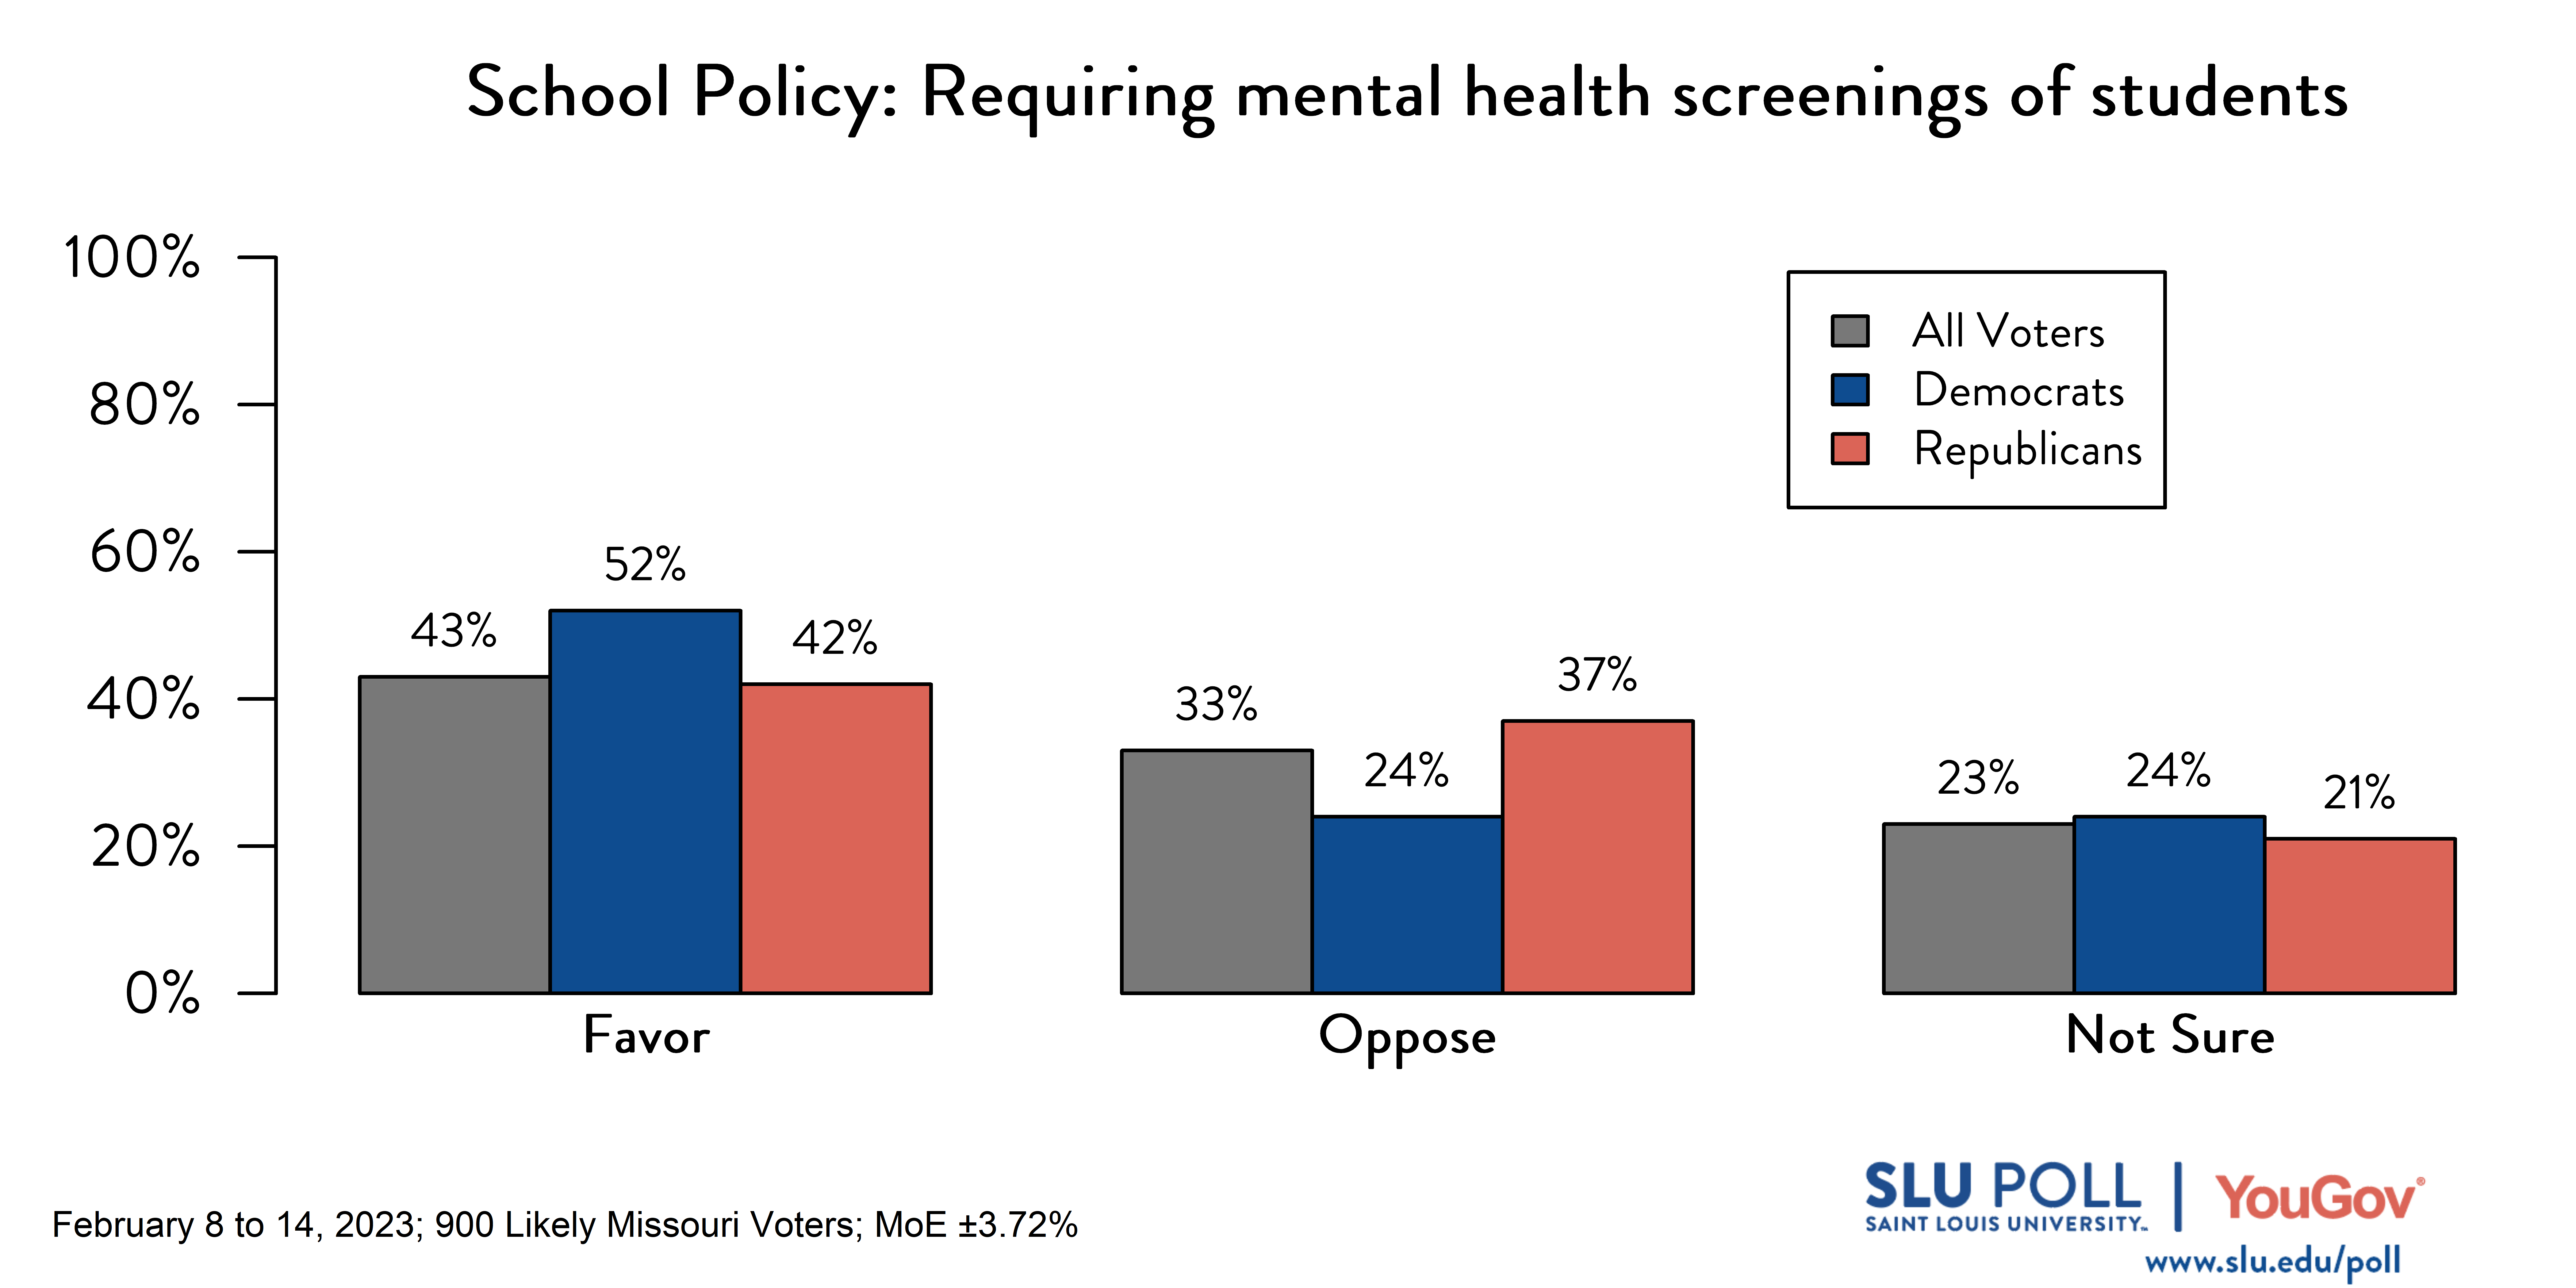 Likely voters' responses to 'Do you favor or oppose the following policies in schools: Requiring mental health screenings of students?': 43% Favor, 33% Oppose, and 23% Not sure. Democratic voters' responses: ' 52% Favor, 24% Oppose, and 24% Not sure. Republican voters' responses: 42% Favor, 37% Oppose, and 21% Not sure.